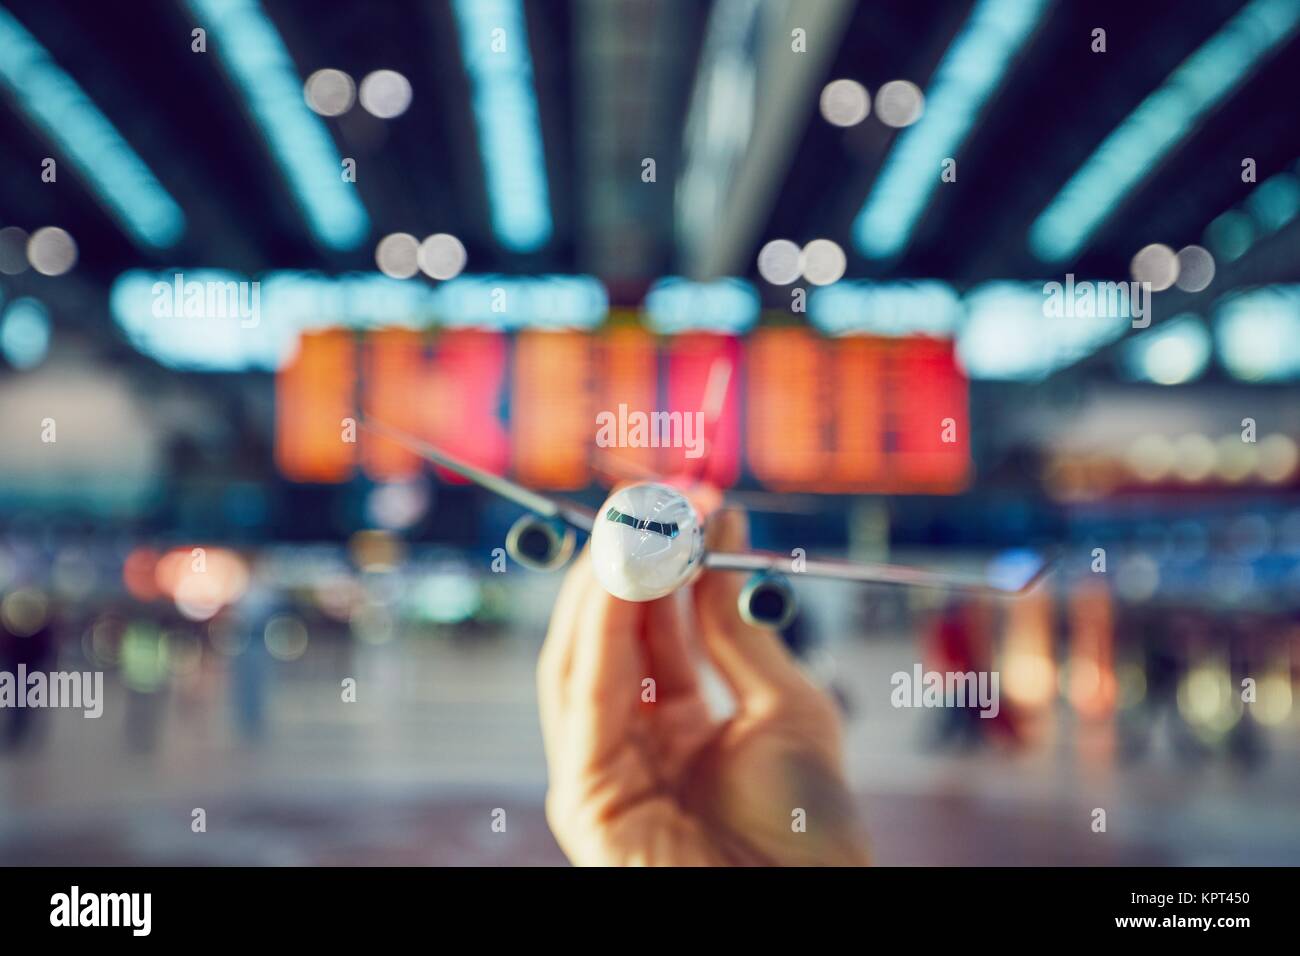 Hand is holding model airplane against arrival and departure board in a airport terminal. Stock Photo